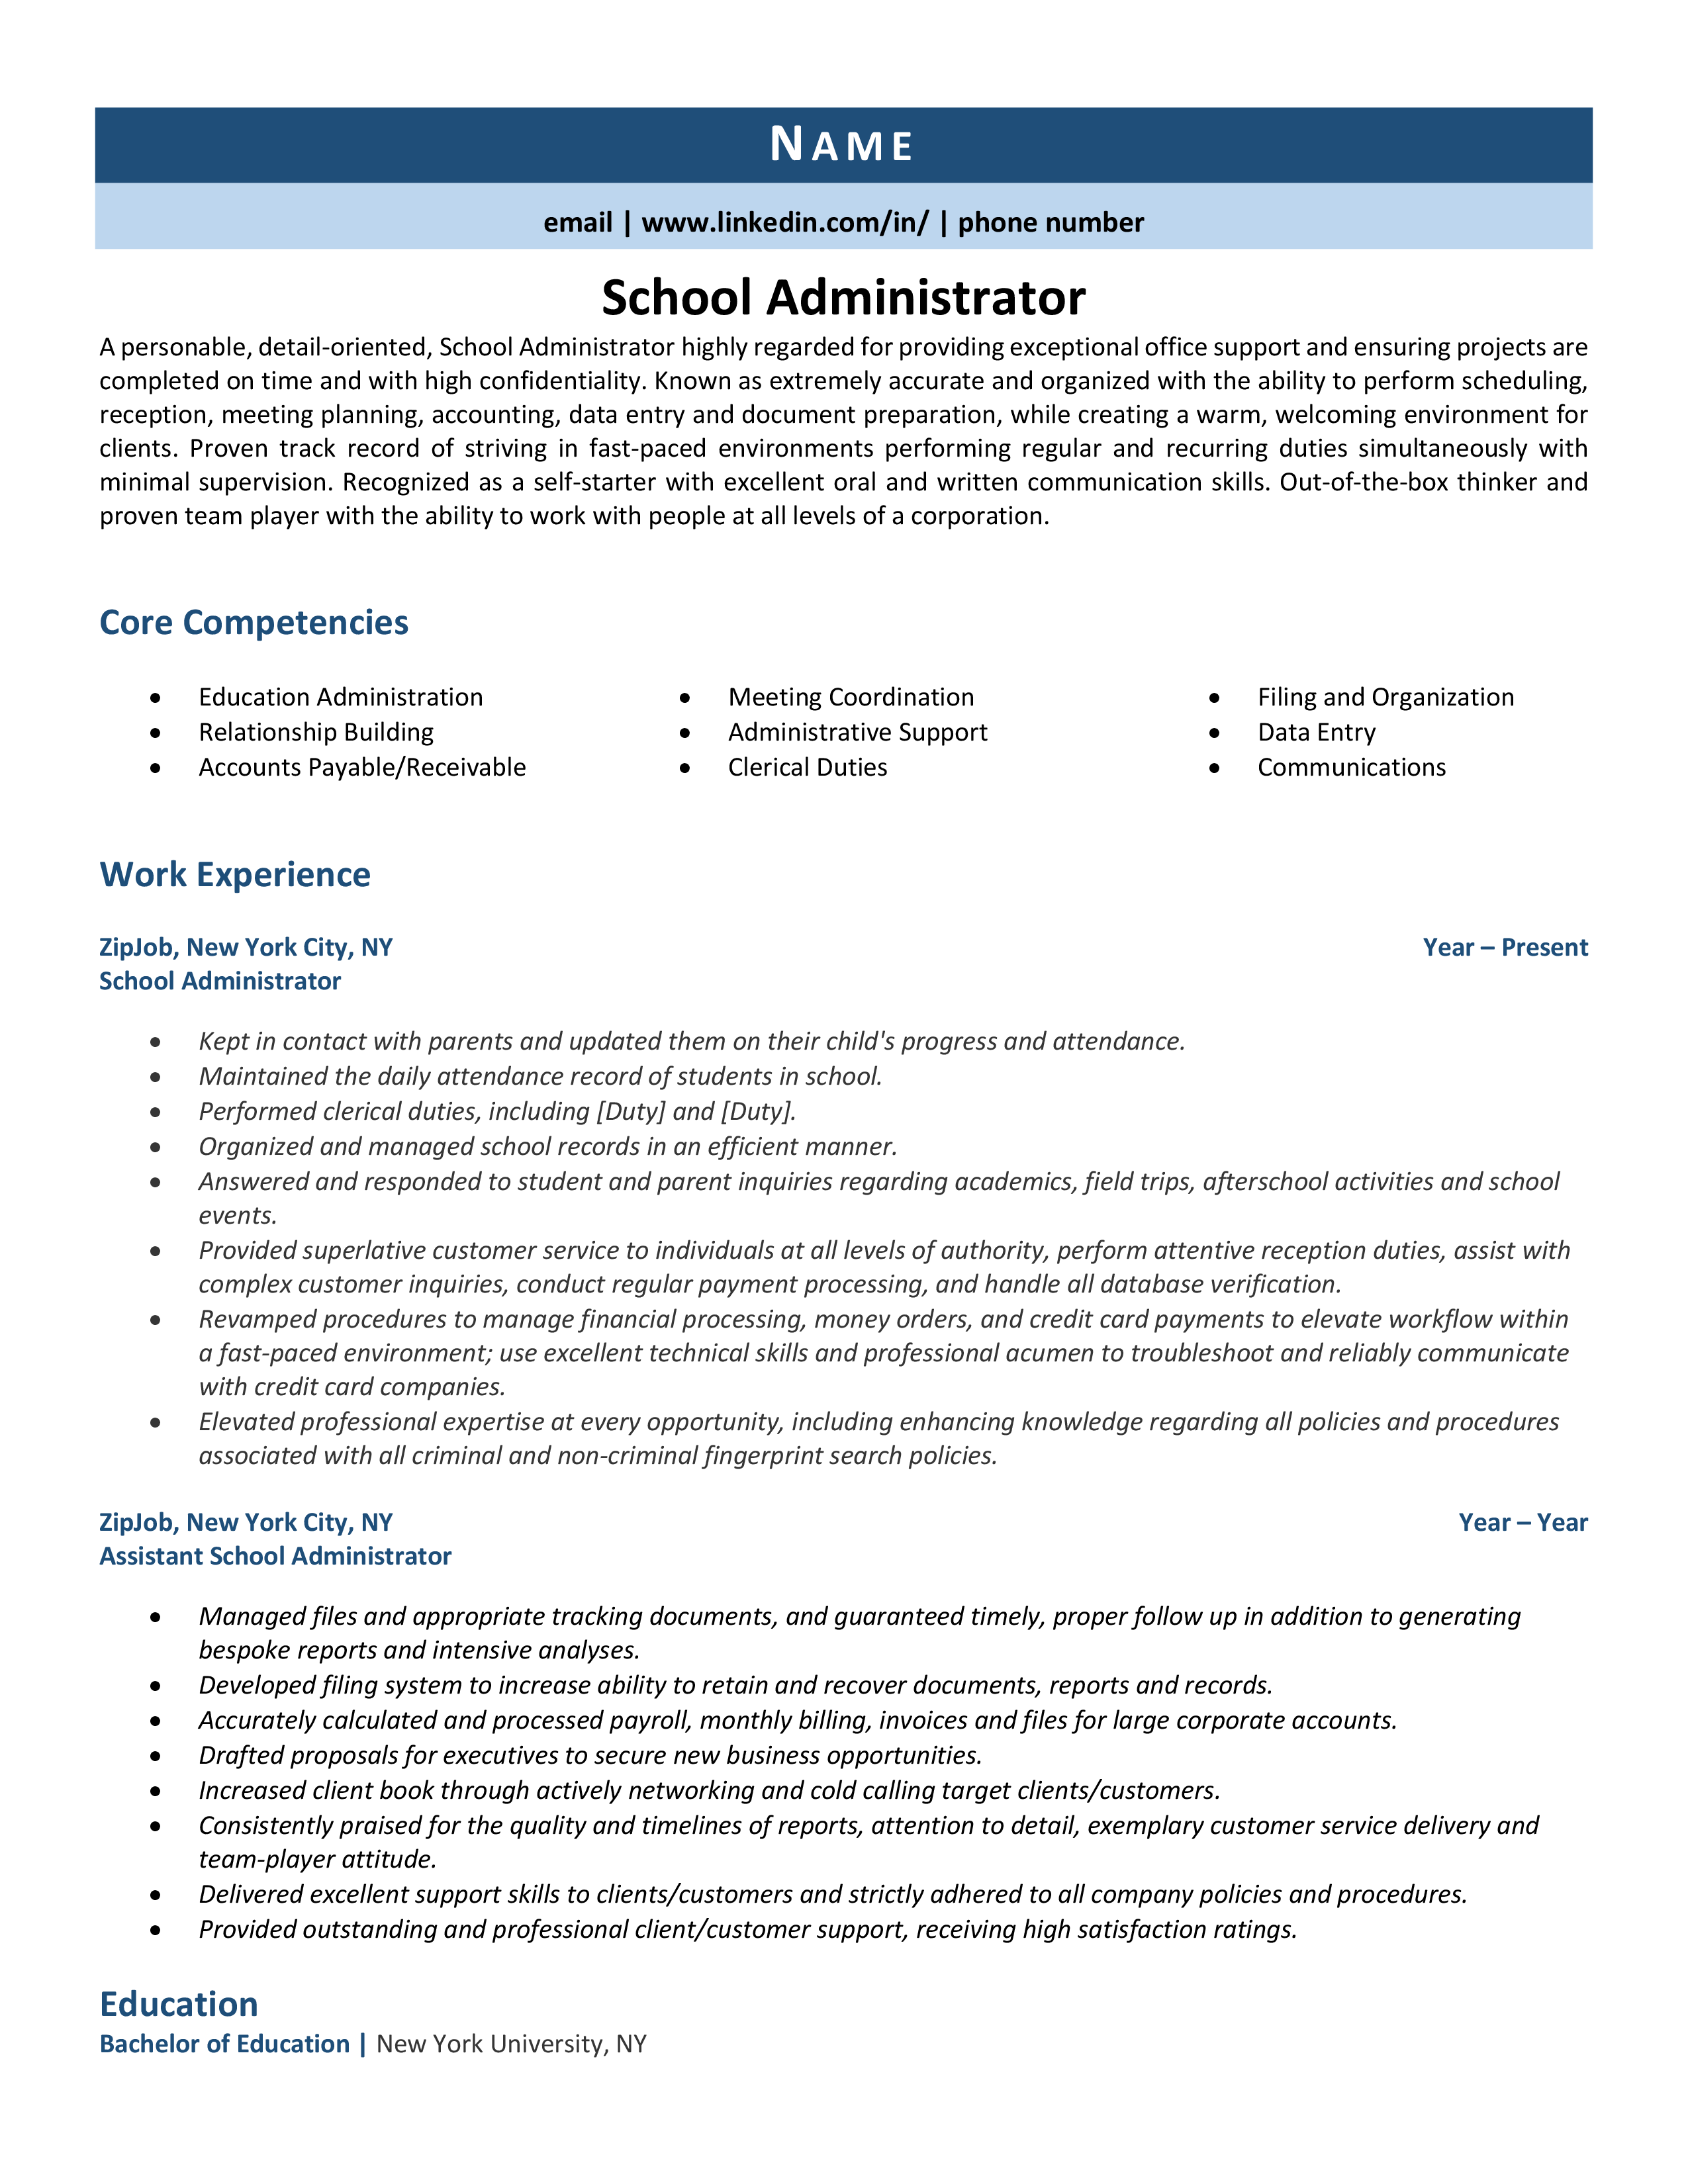 personal statement for school administrator